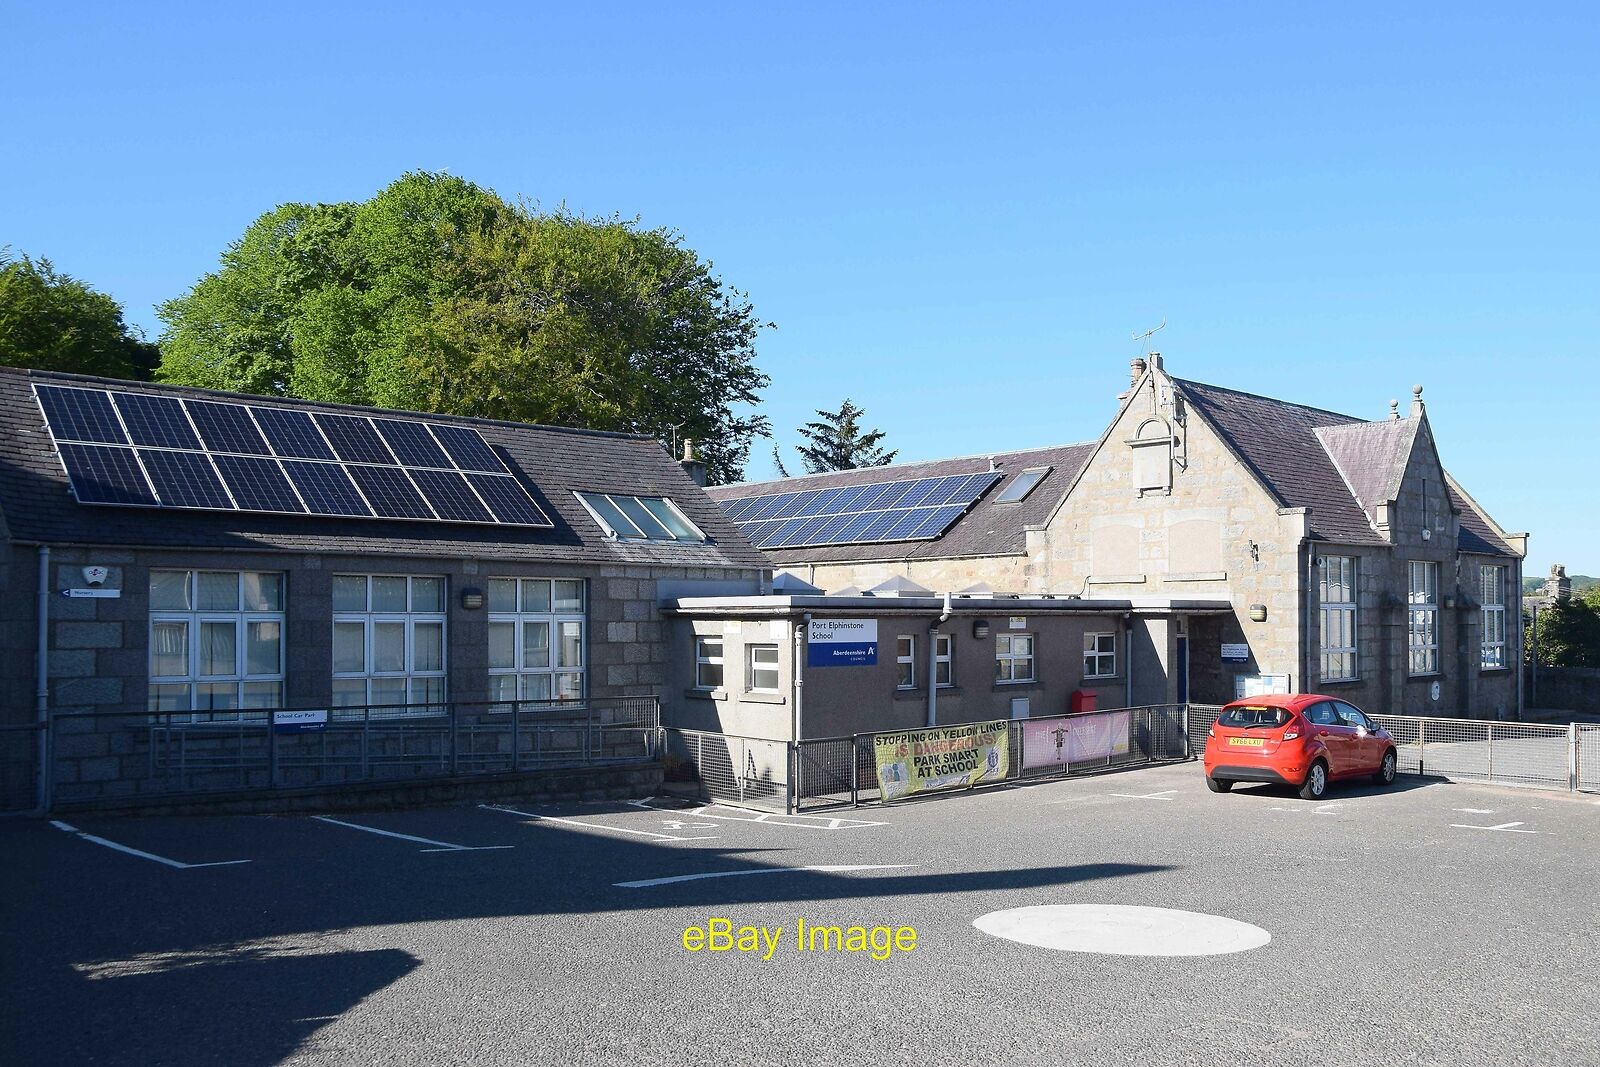 Photo 6x4 Port Elphinstone Primary School Inverurie Built 1870 and extend c2020